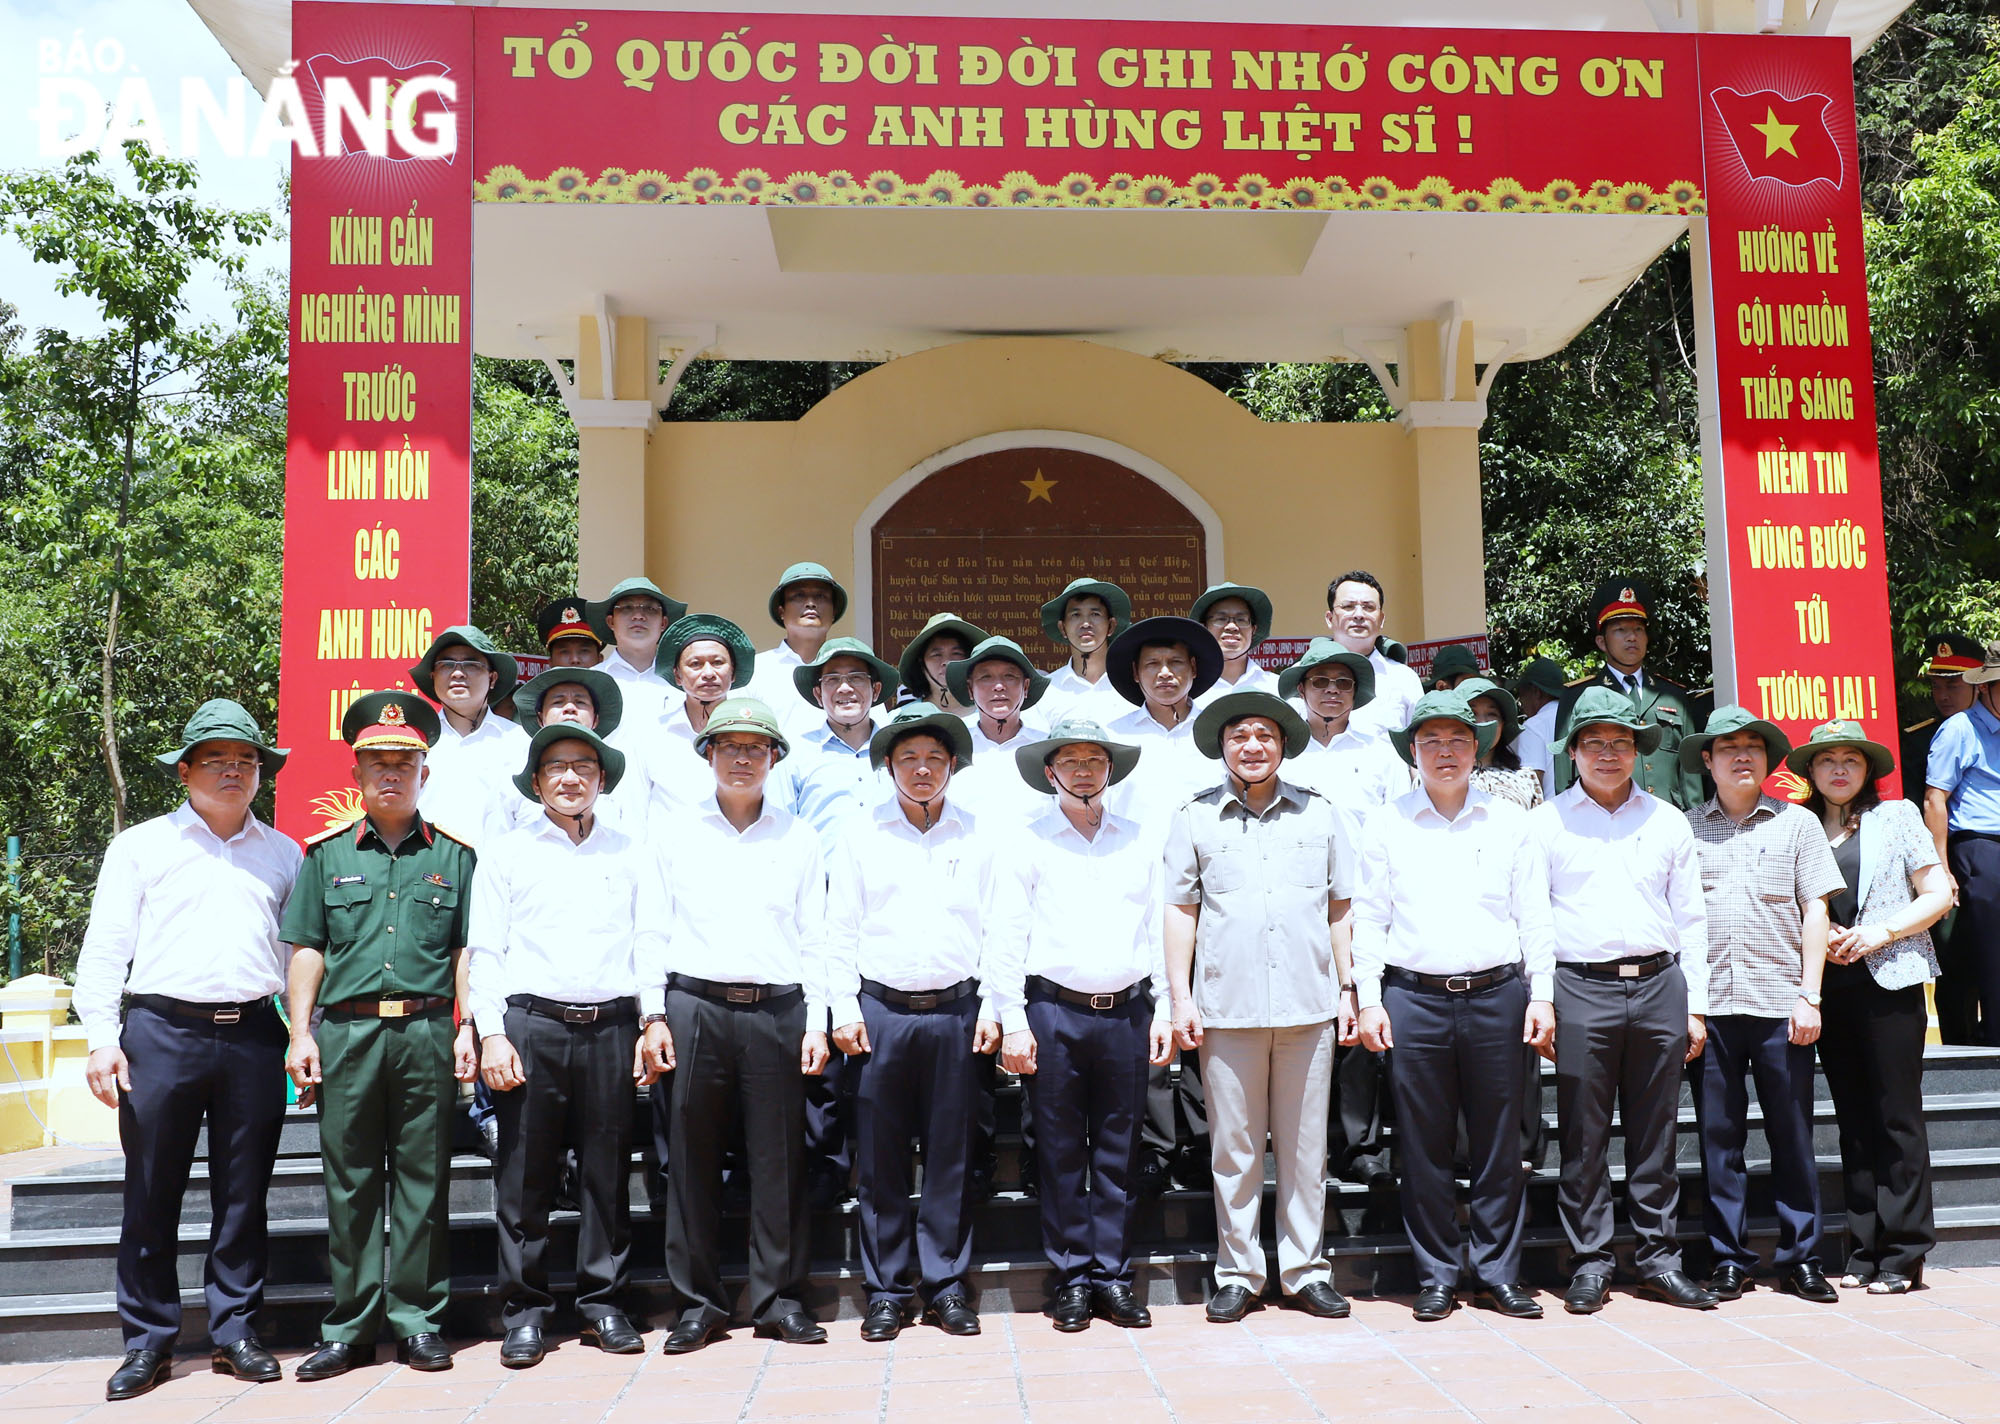 Delegates from the Standing Board of the Da Nang Party Committee and its Quang Nam counterpart pose for a group photo at the relic of the former Quang Da Special Zone in Duy Son Commune, Duy Xuyen District, Quang Nam Province, April 25, 2022. Photo: NGOC PHU